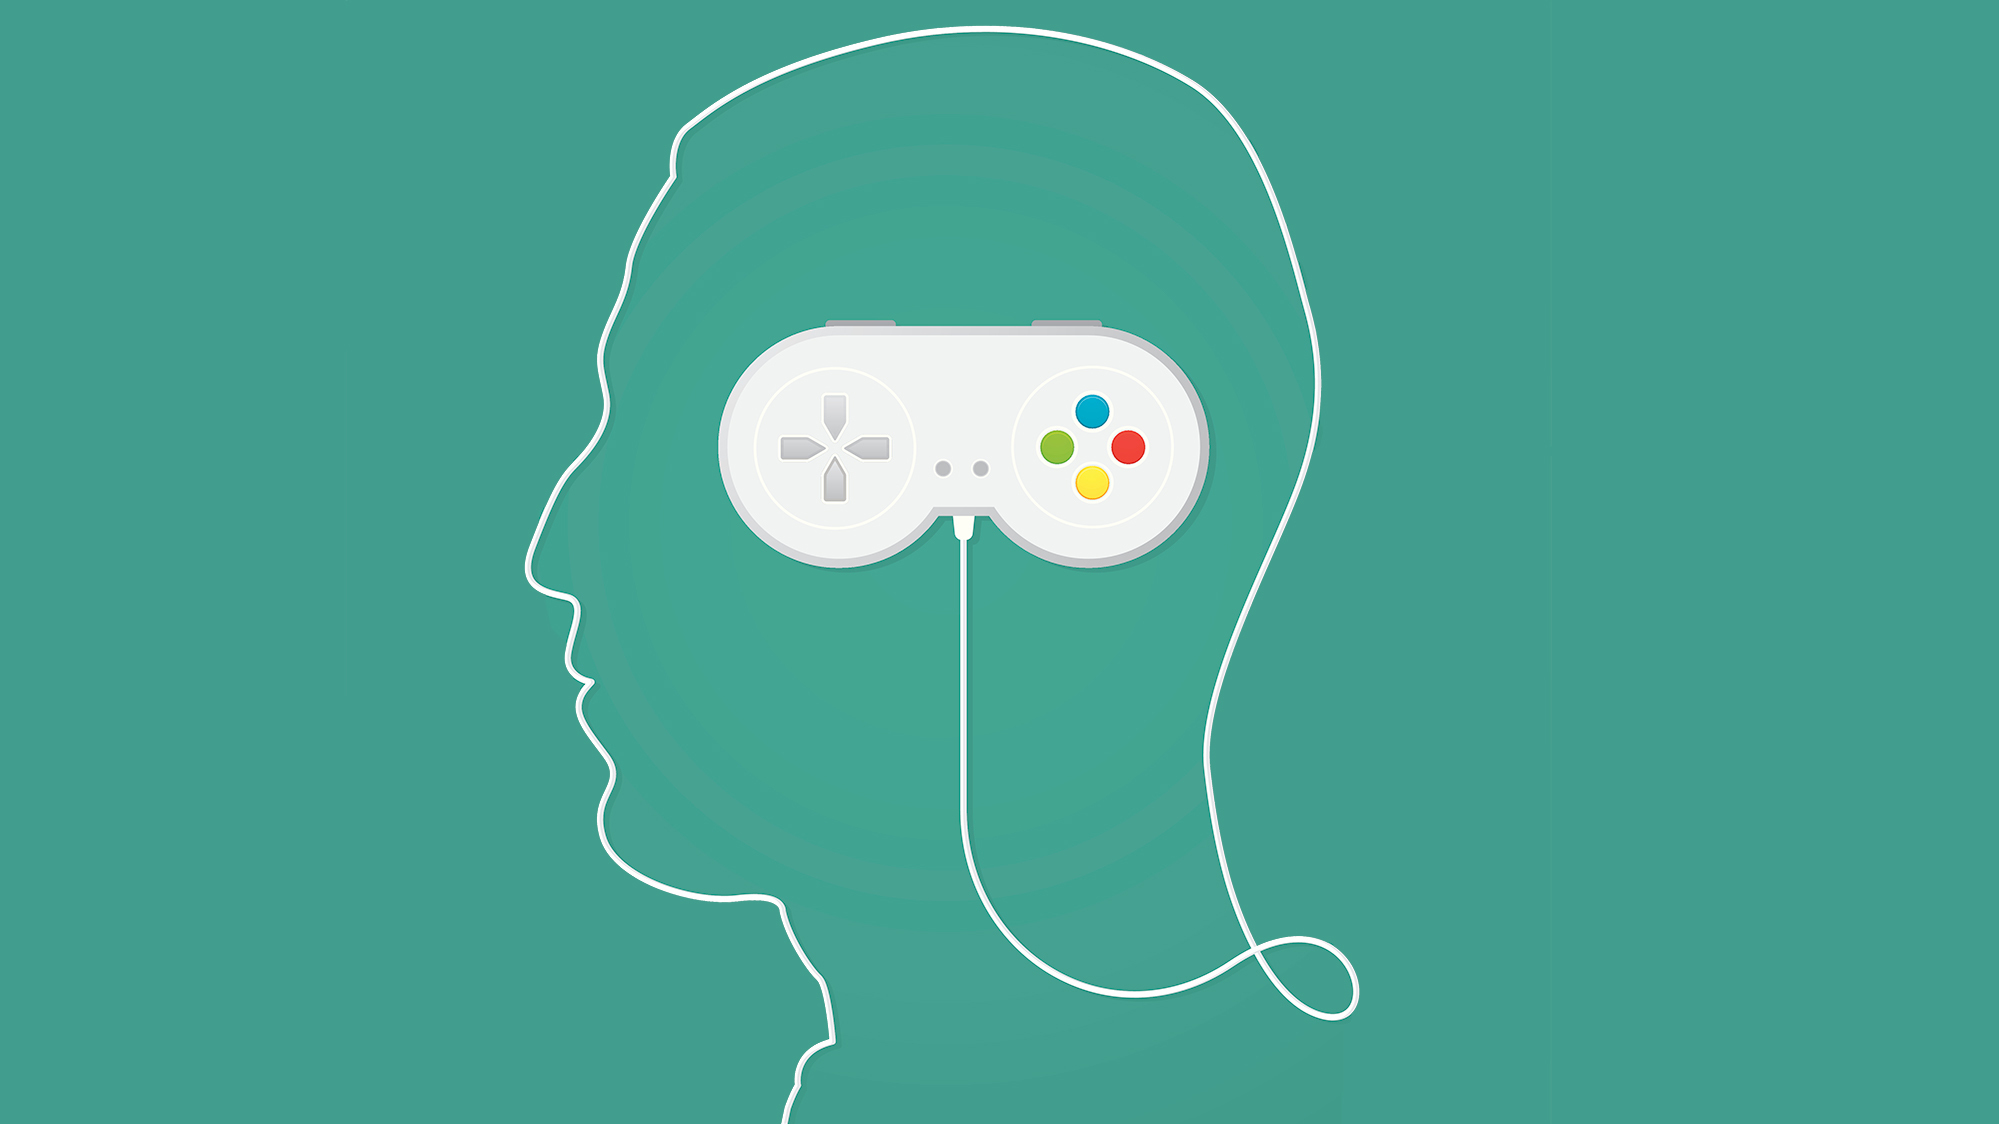 A green background with an image of a head with a video game controller inside it. This image represents the connection between video games and mental health, and how video games can be used as a tool for support.